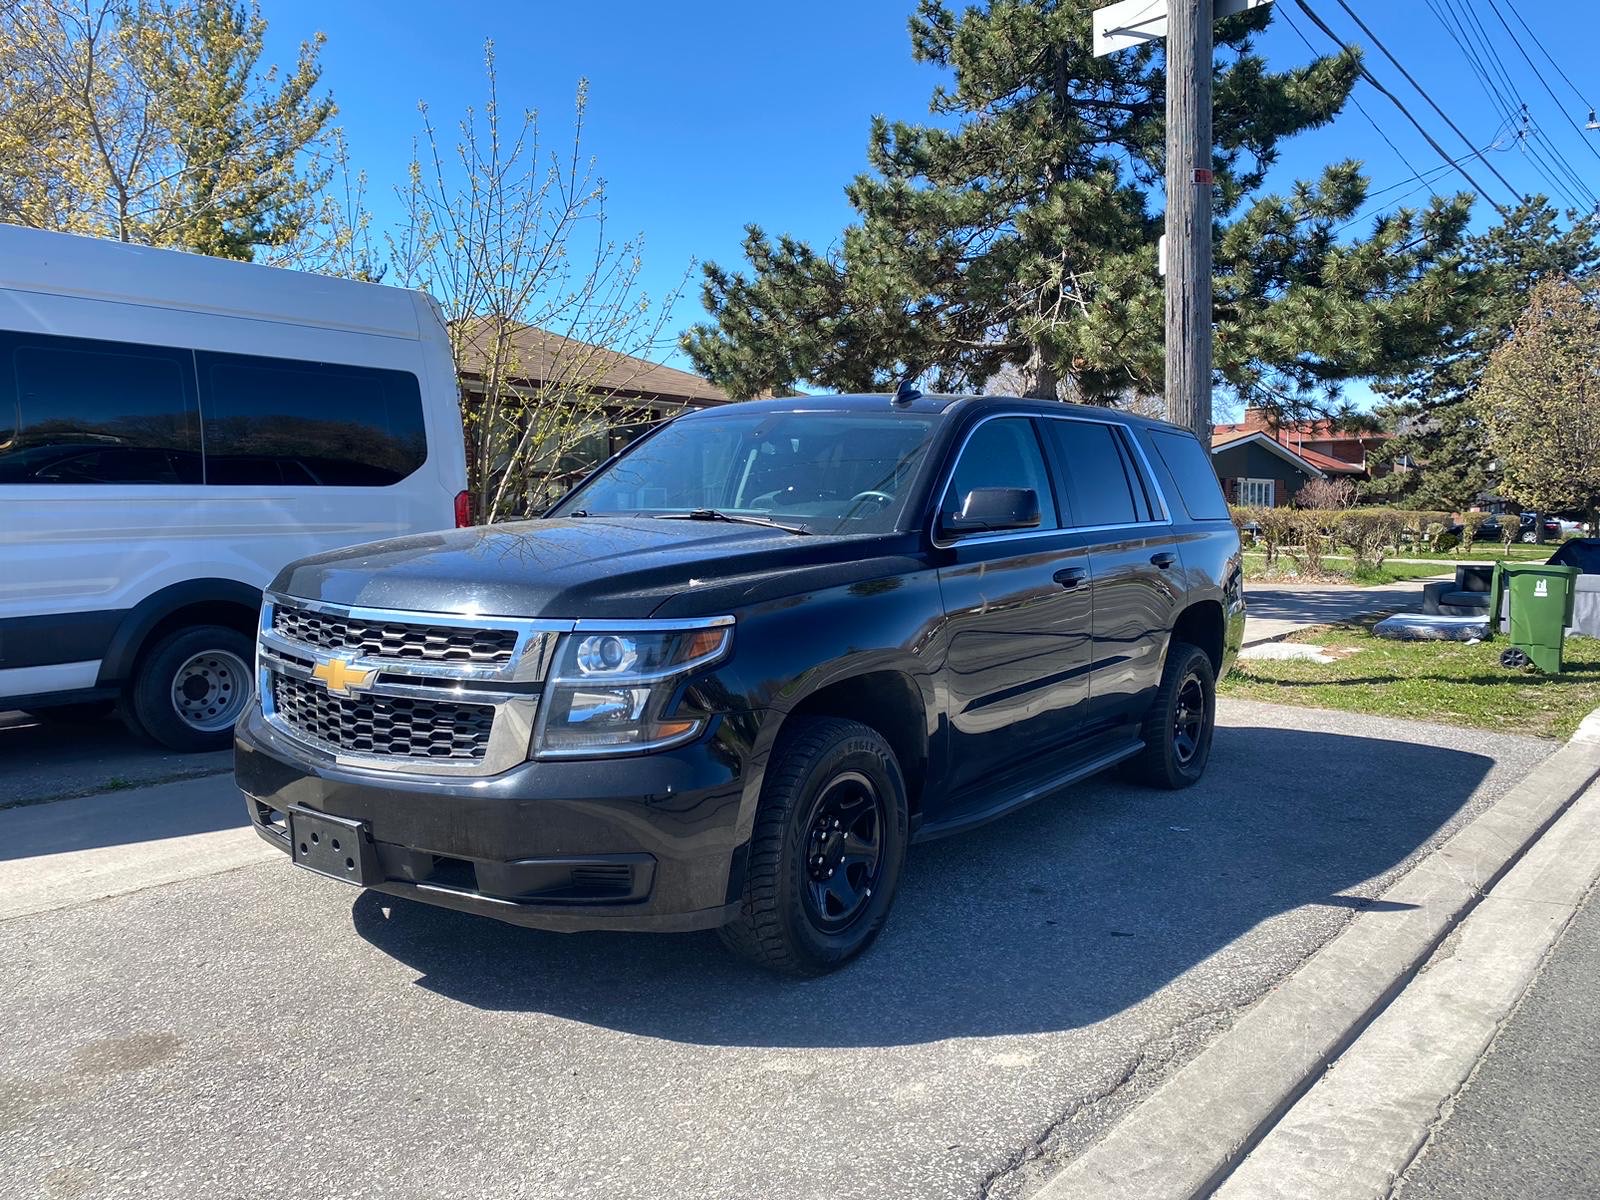 2020 Chevrolet Tahoe Special Service 4WD